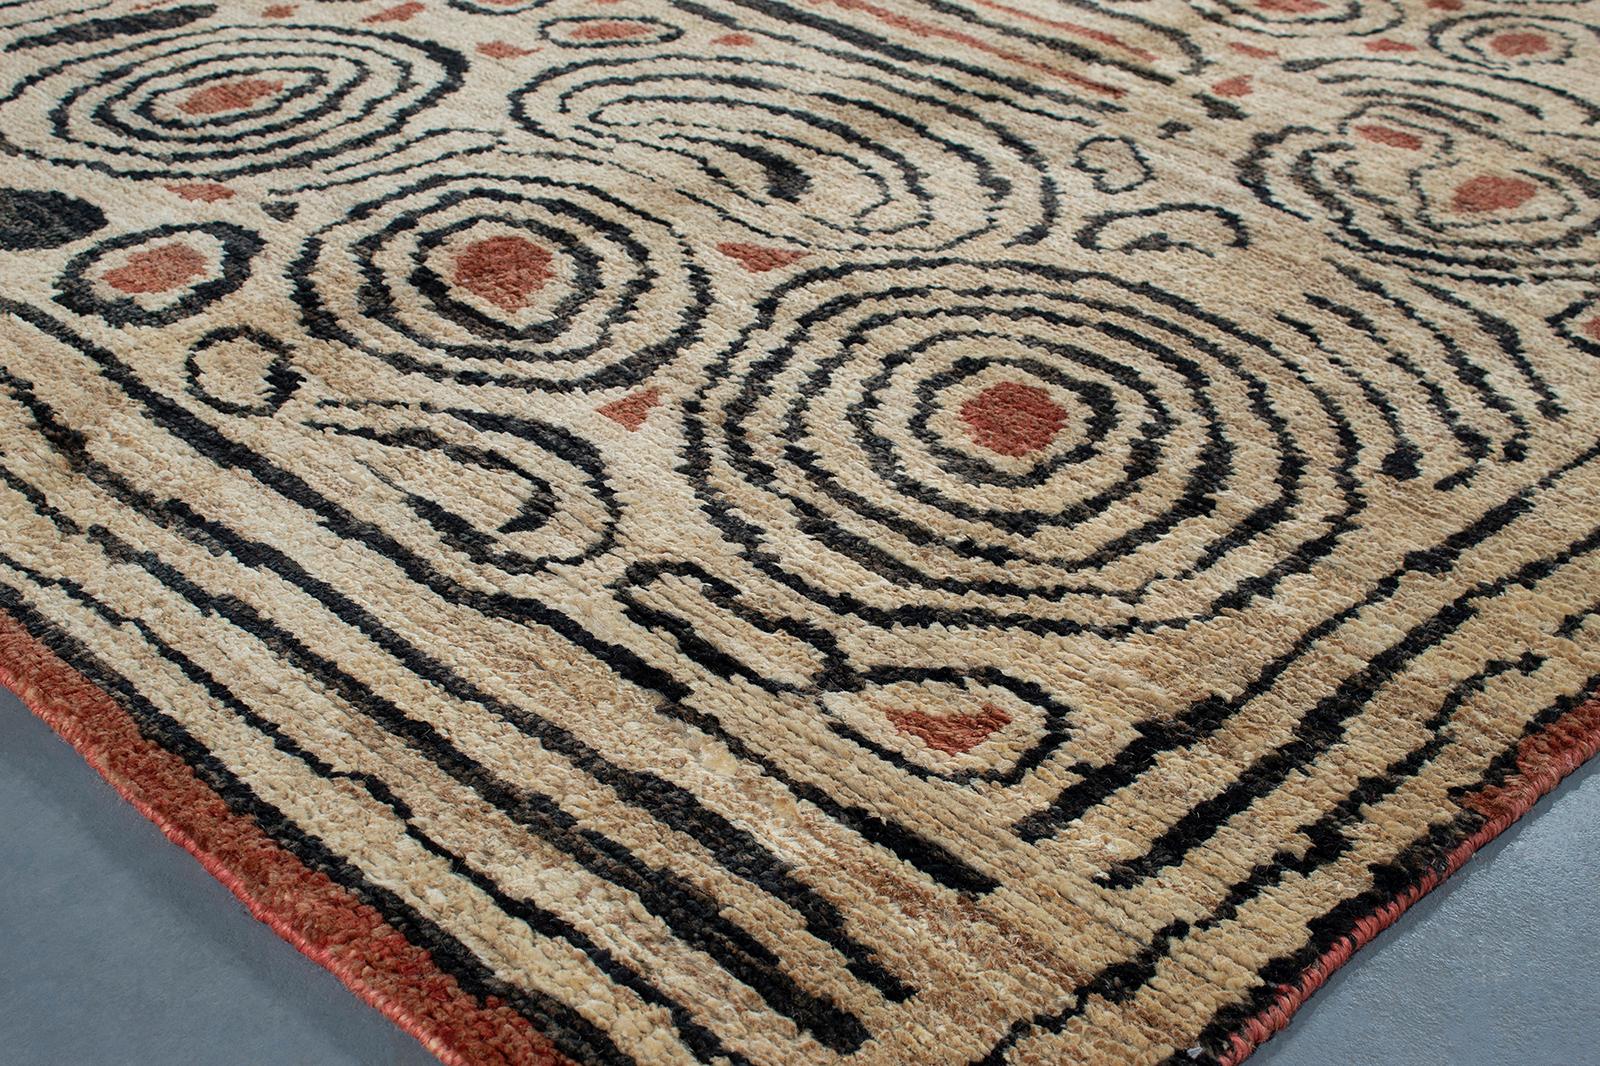 This vintage European design French jute rug is skillfully sourced by N A S I R I and exclusive to our showroom. 

Custom recreations available in any size, materials, and color. Rug size is 5'9